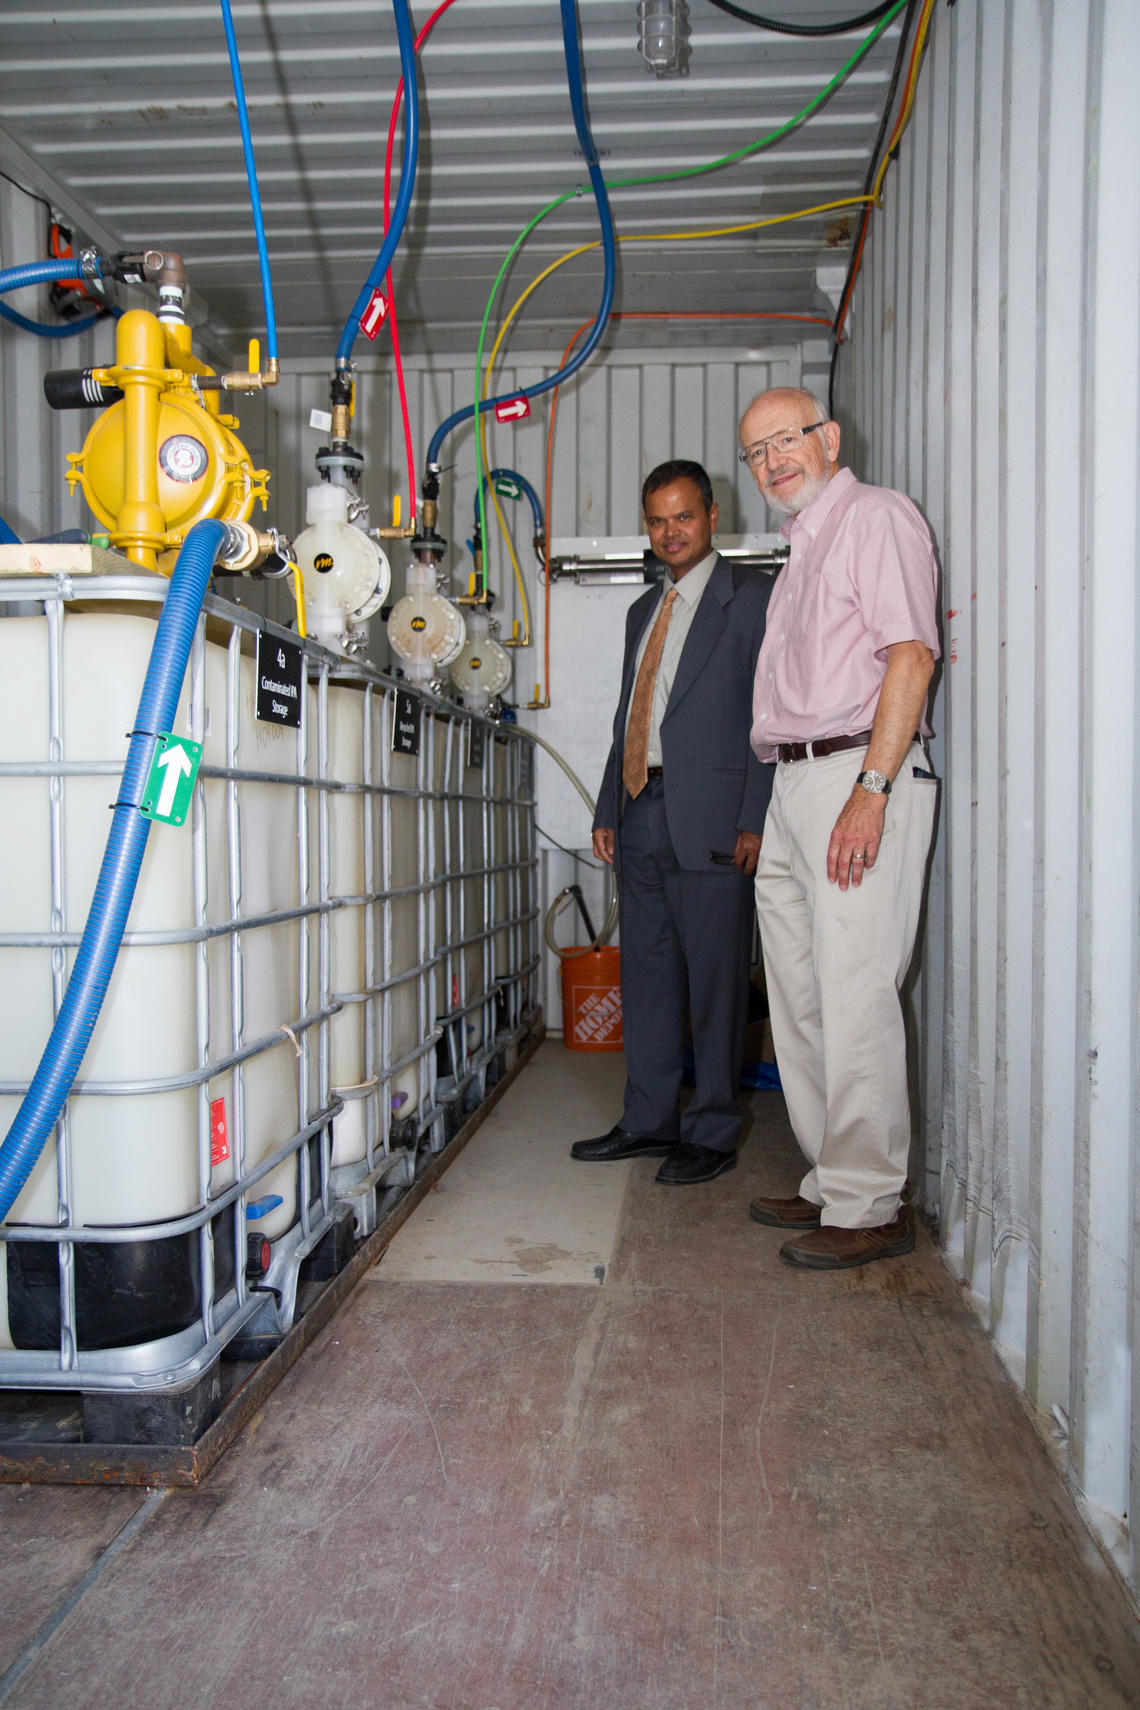 Gopal Achari, left, professor of civil engineering in the Schulich School of Engineering, and Cooper Langford, professor of chemistry in the Faculty of Science, stand inside the mobile PCB cleanup unit.